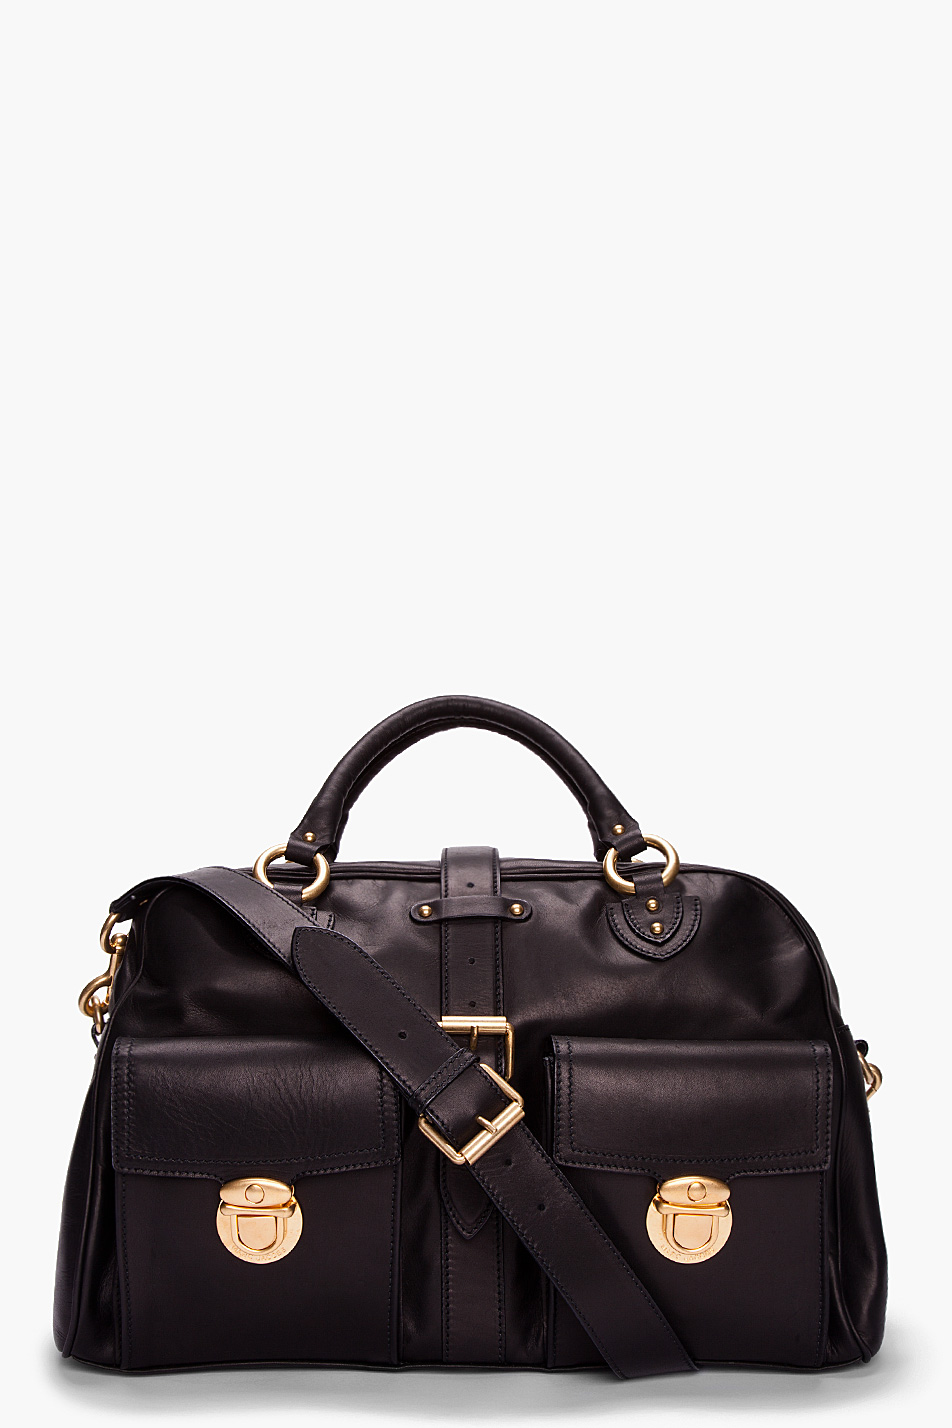 Marc Jacobs Large Black Leather Cargo Duffle Bag in Black for Men | Lyst